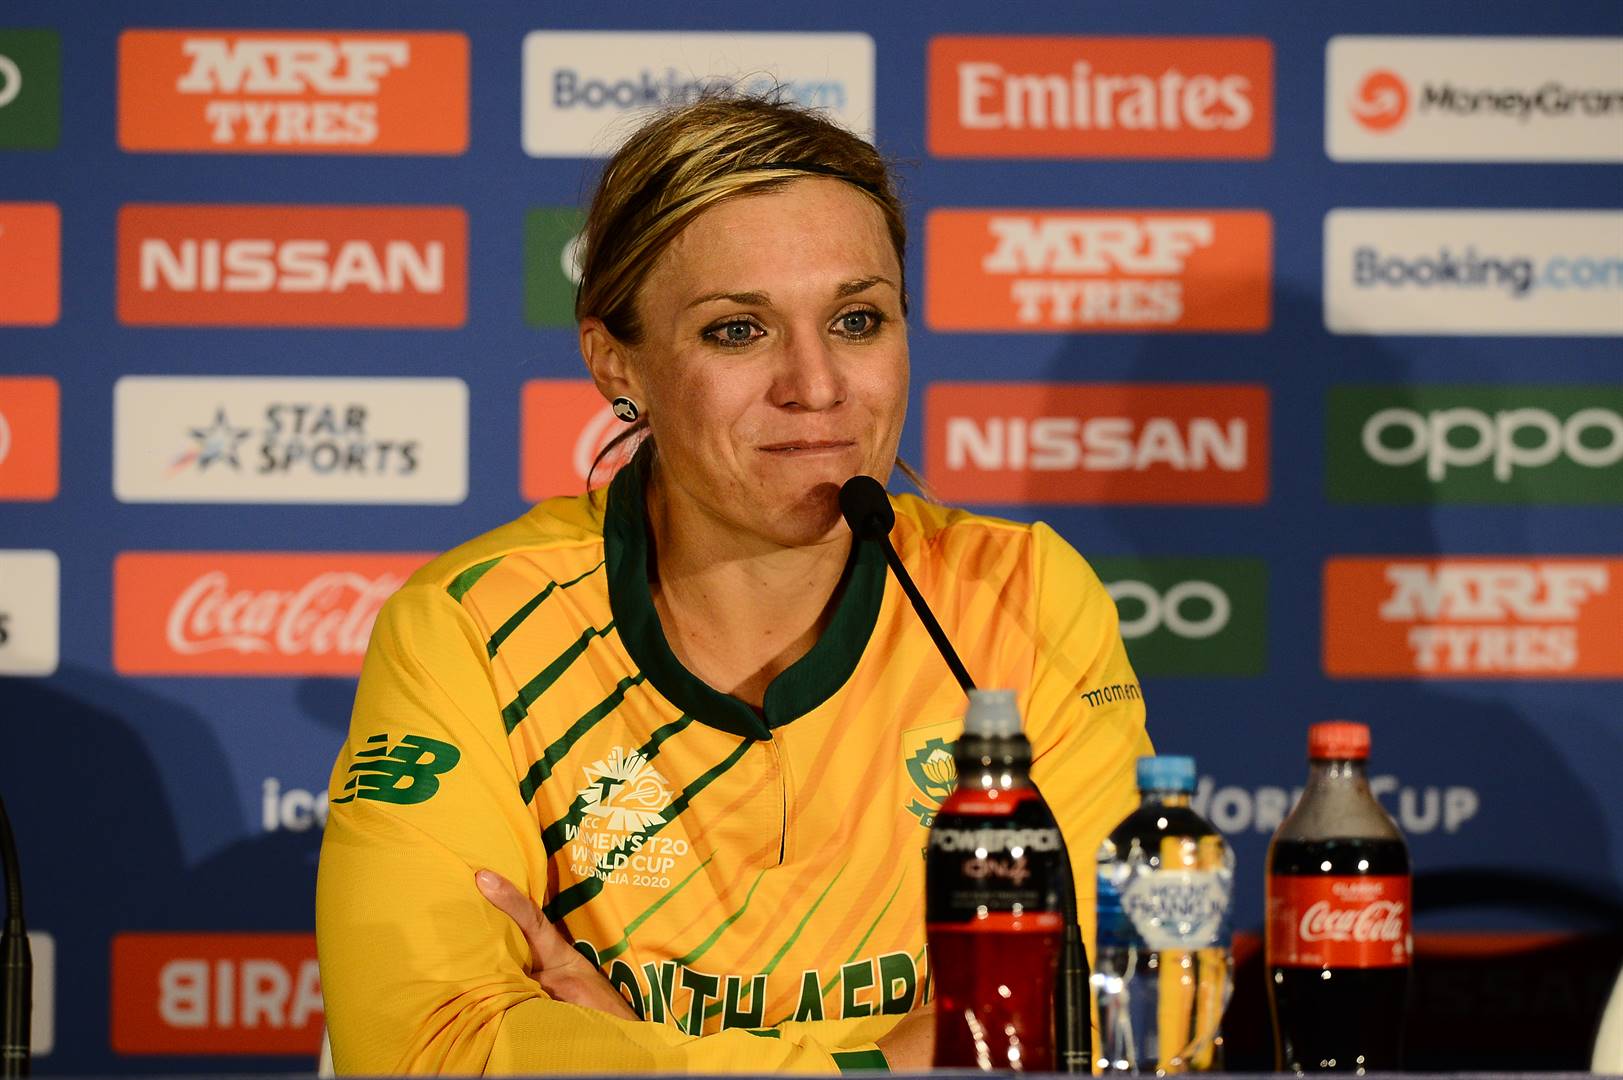 Proteas Women team member Mignon du Preez speaks to the media during the ICC Women’s T20 Cricket World Cup in Perth, Australia, this week. Picture: Isuru Sameera Peiris/Gallo Images